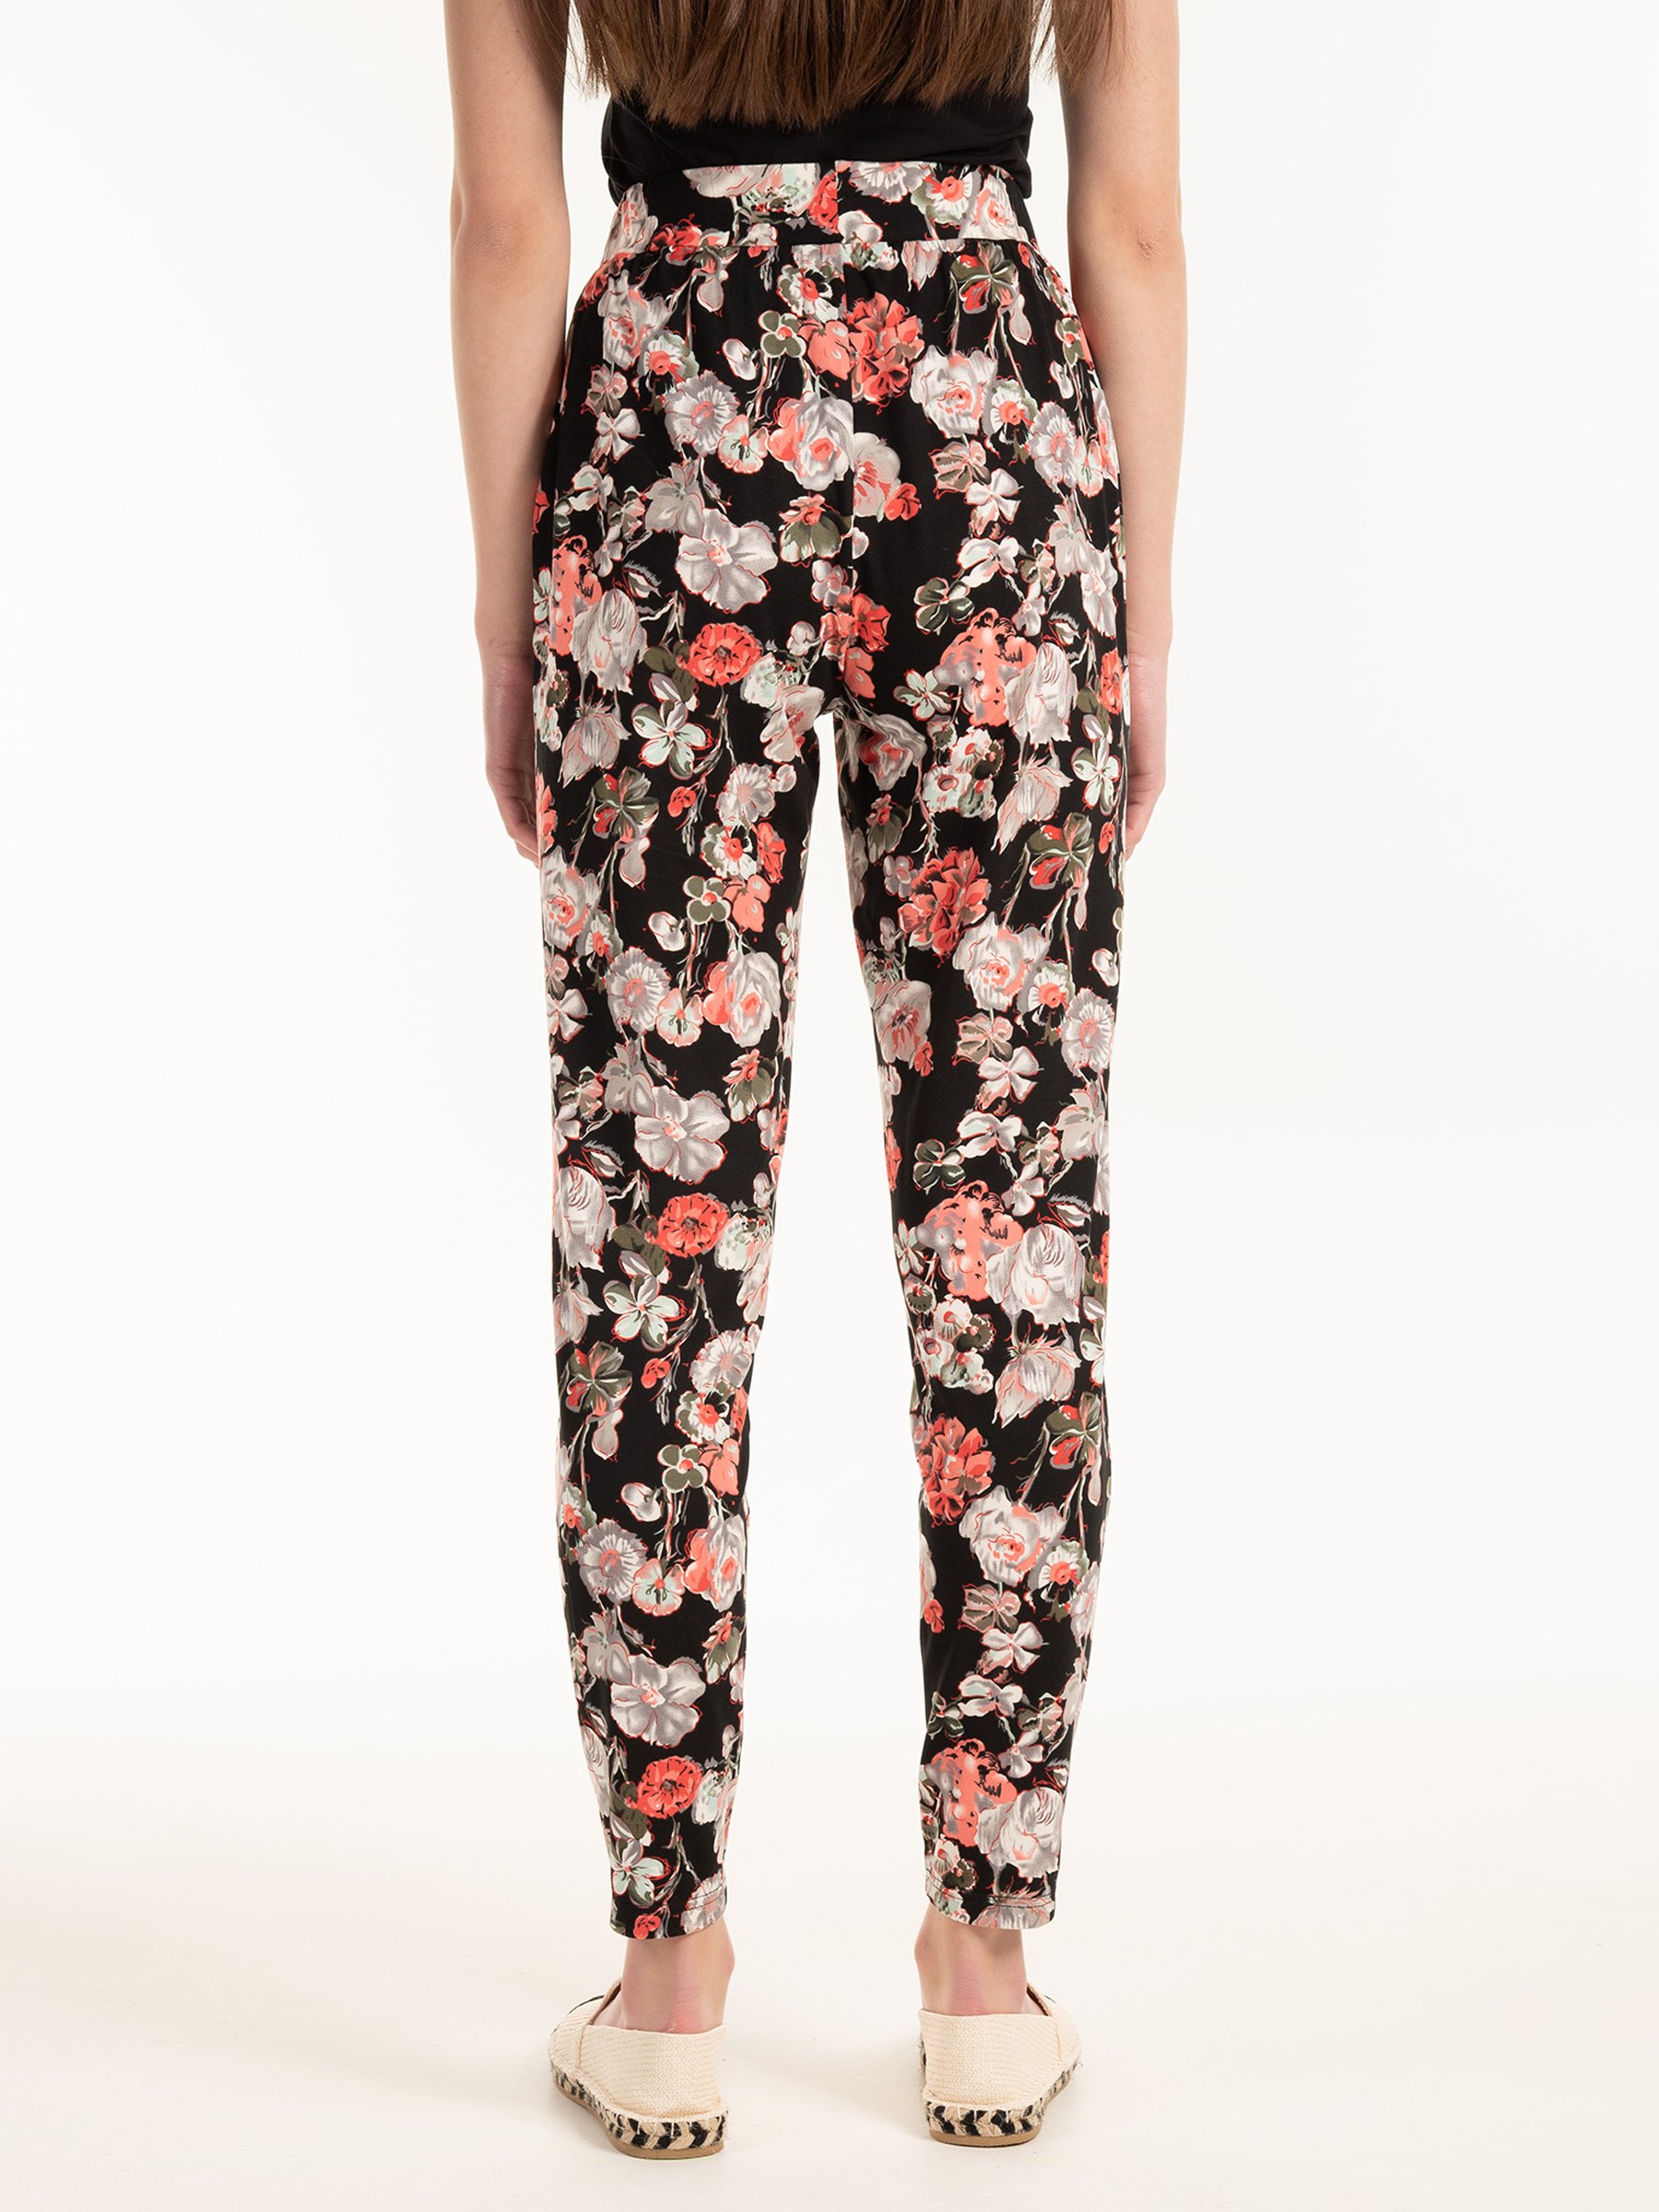 Share more than 75 high waisted floral trousers best - in.cdgdbentre